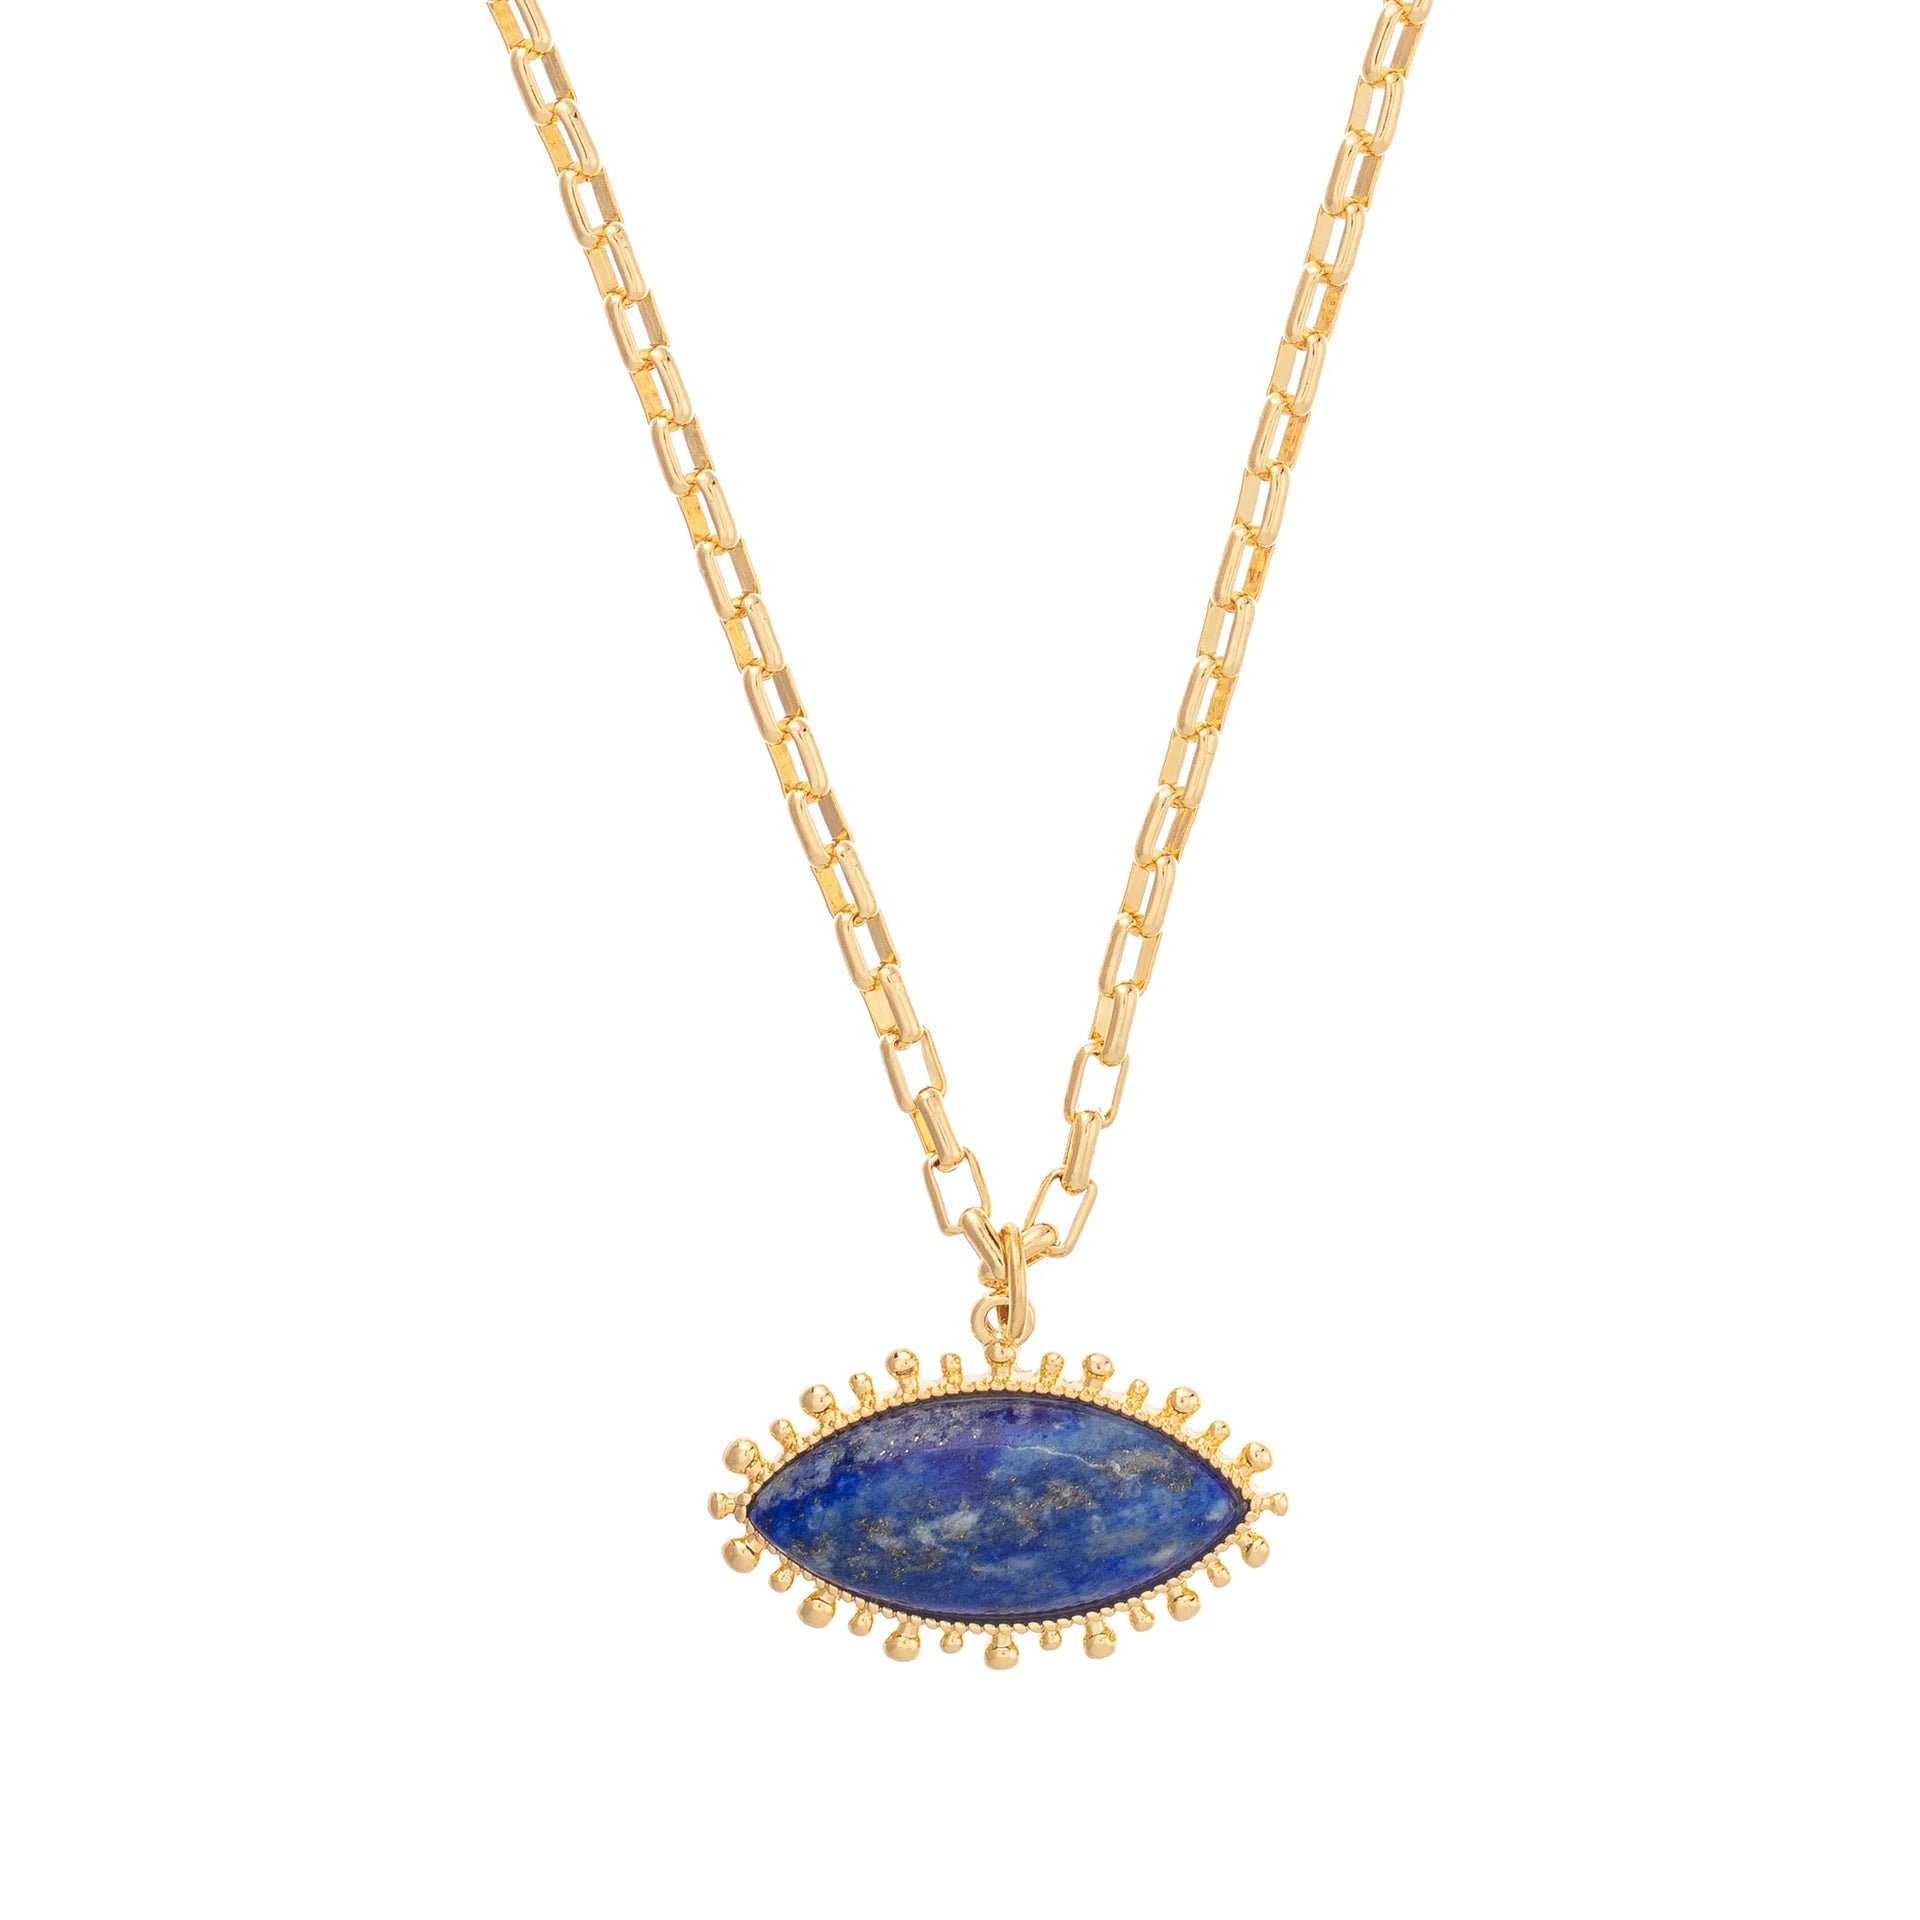 Lapis lazuli pendant in gold colour, Talis Chains jewellery, layering necklace